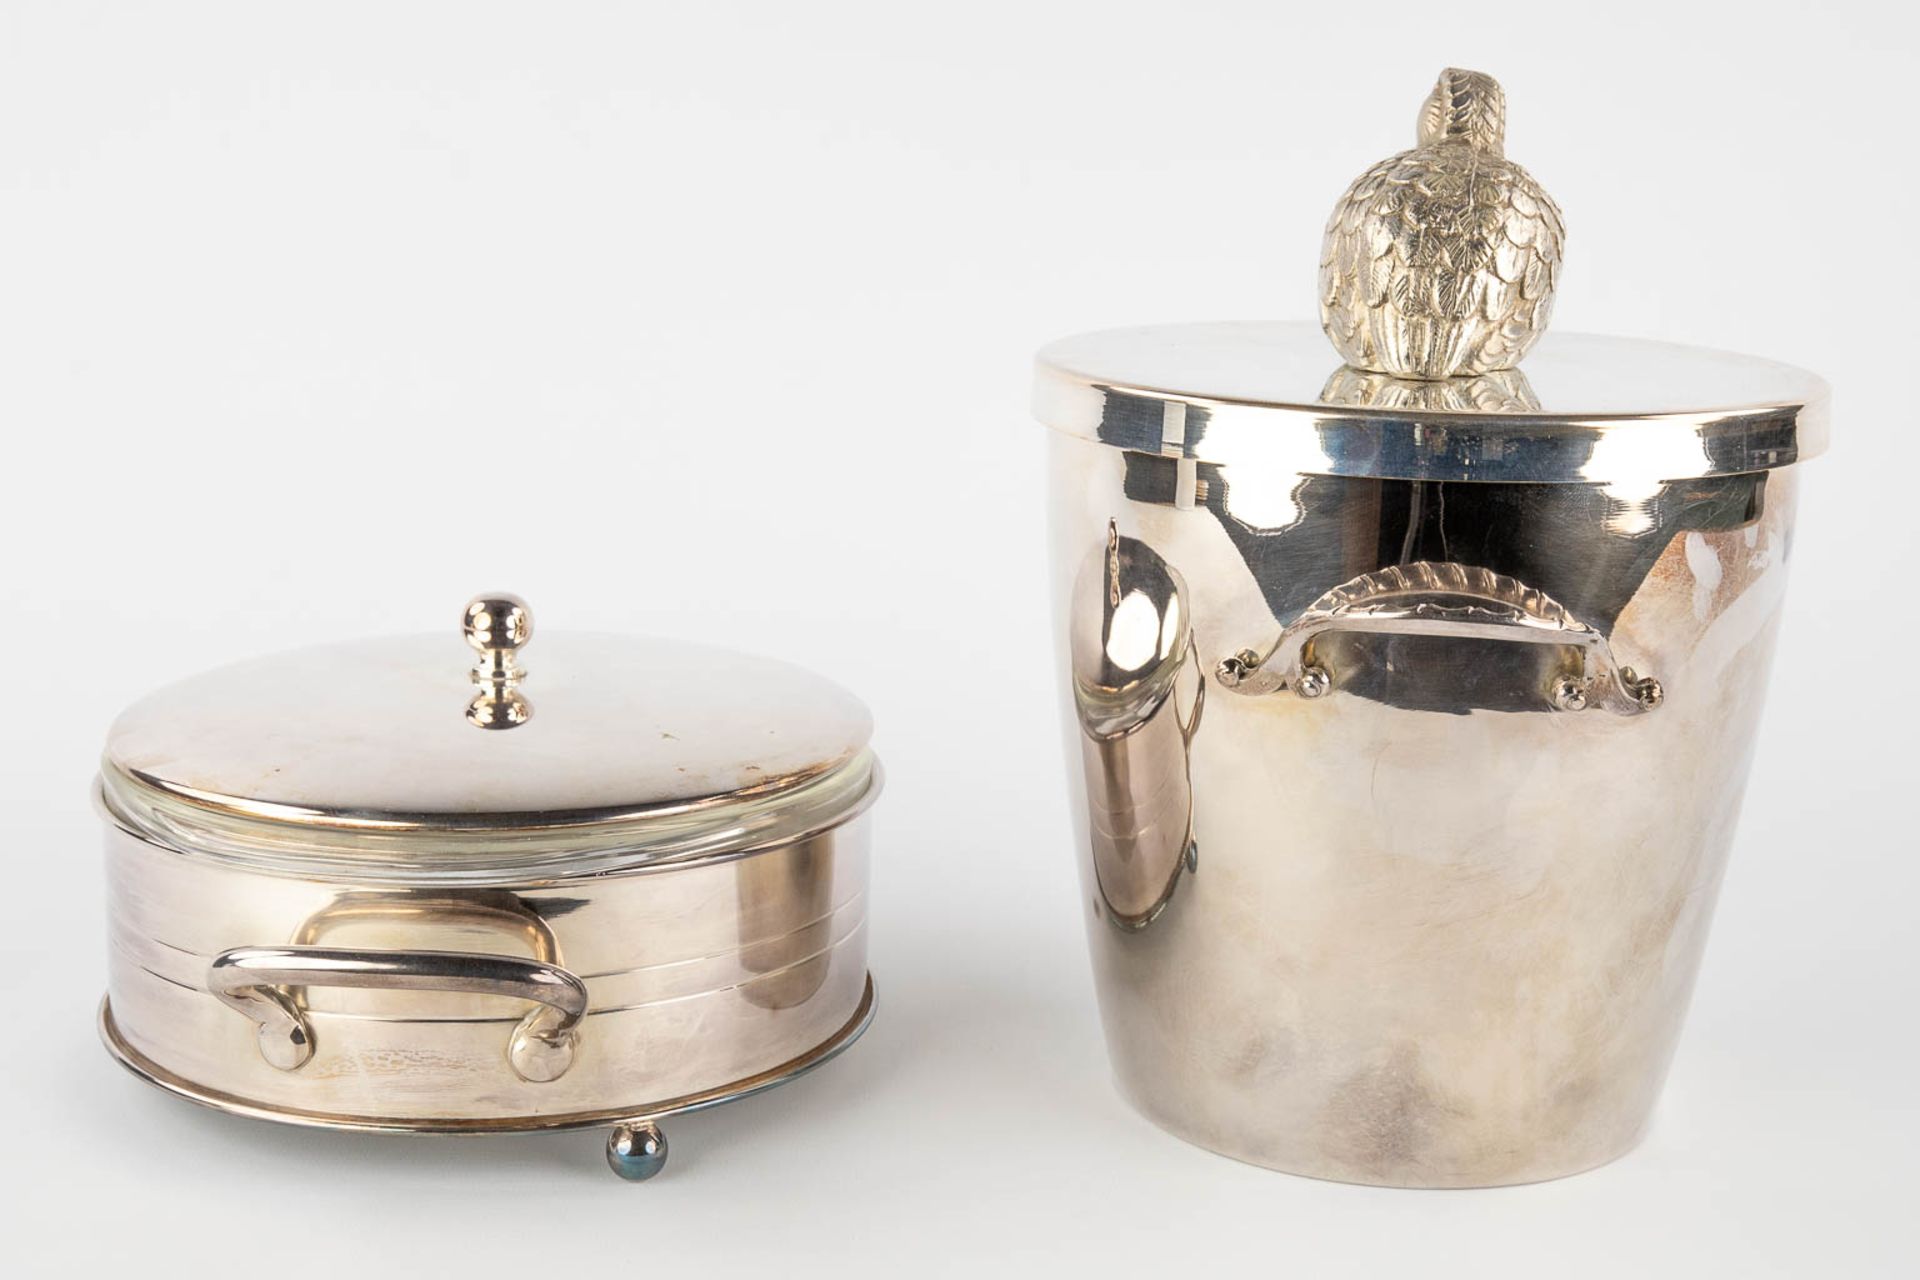 Four silver-plated storage boxes, ice-pails. (H:27 x D:20 cm) - Image 4 of 20